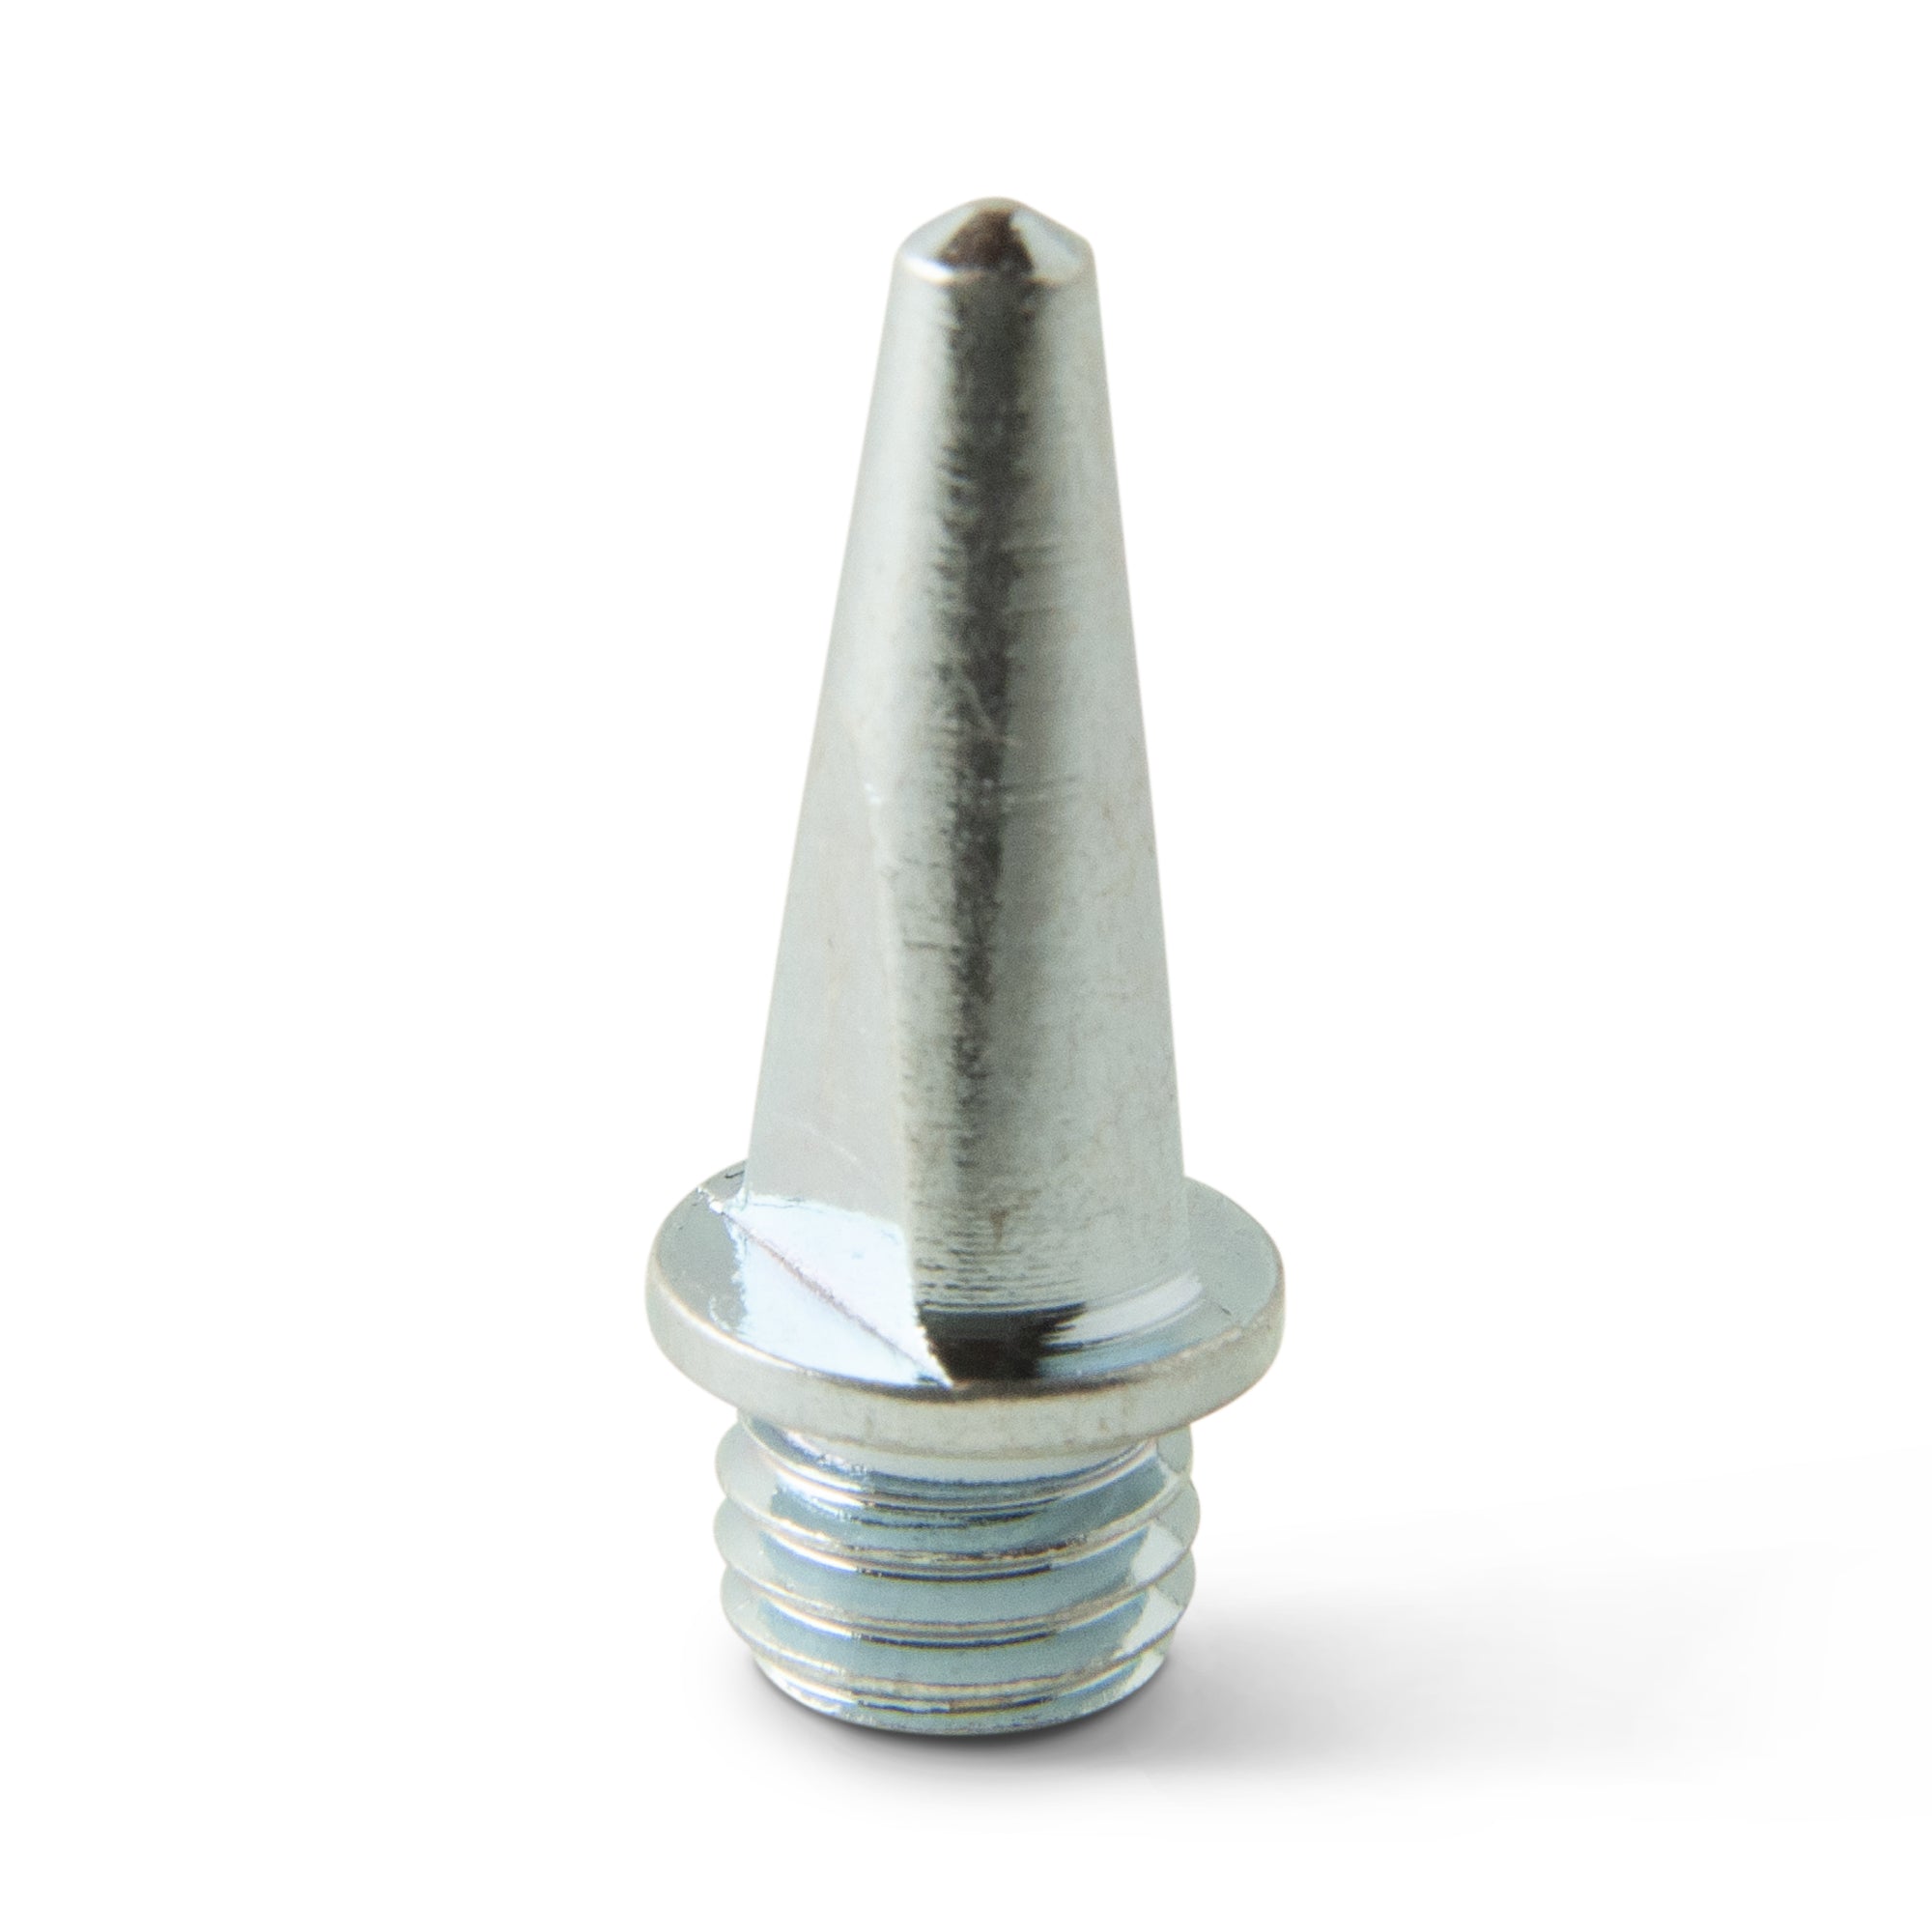 Steel pyramid spikes for athletics - 12mm